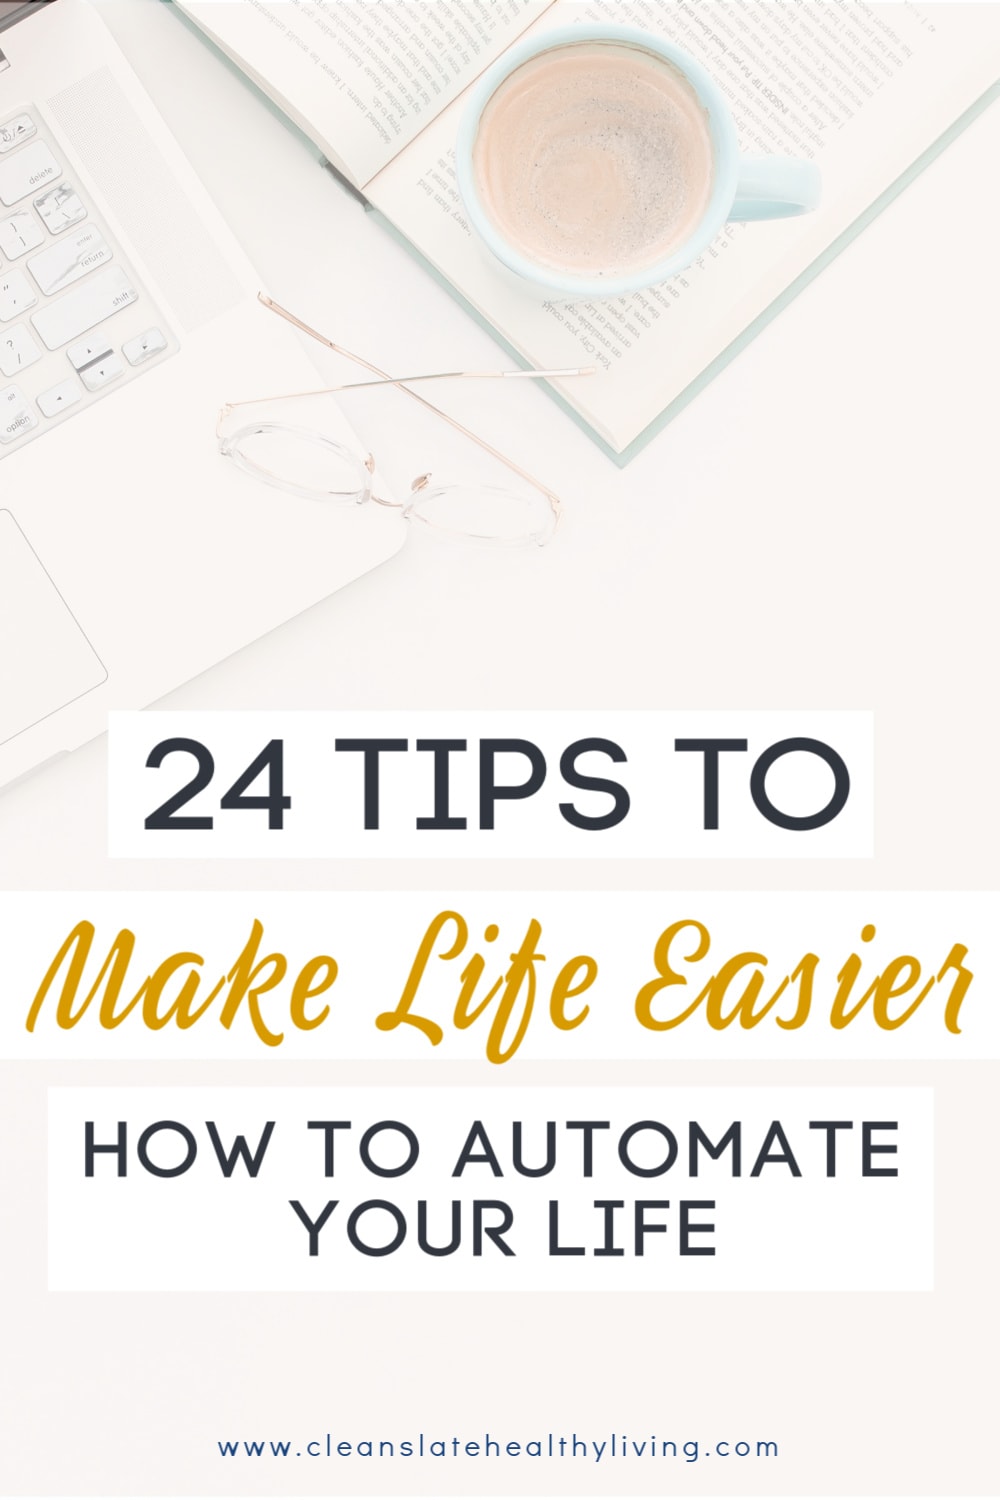 how to automate your life to make life easier